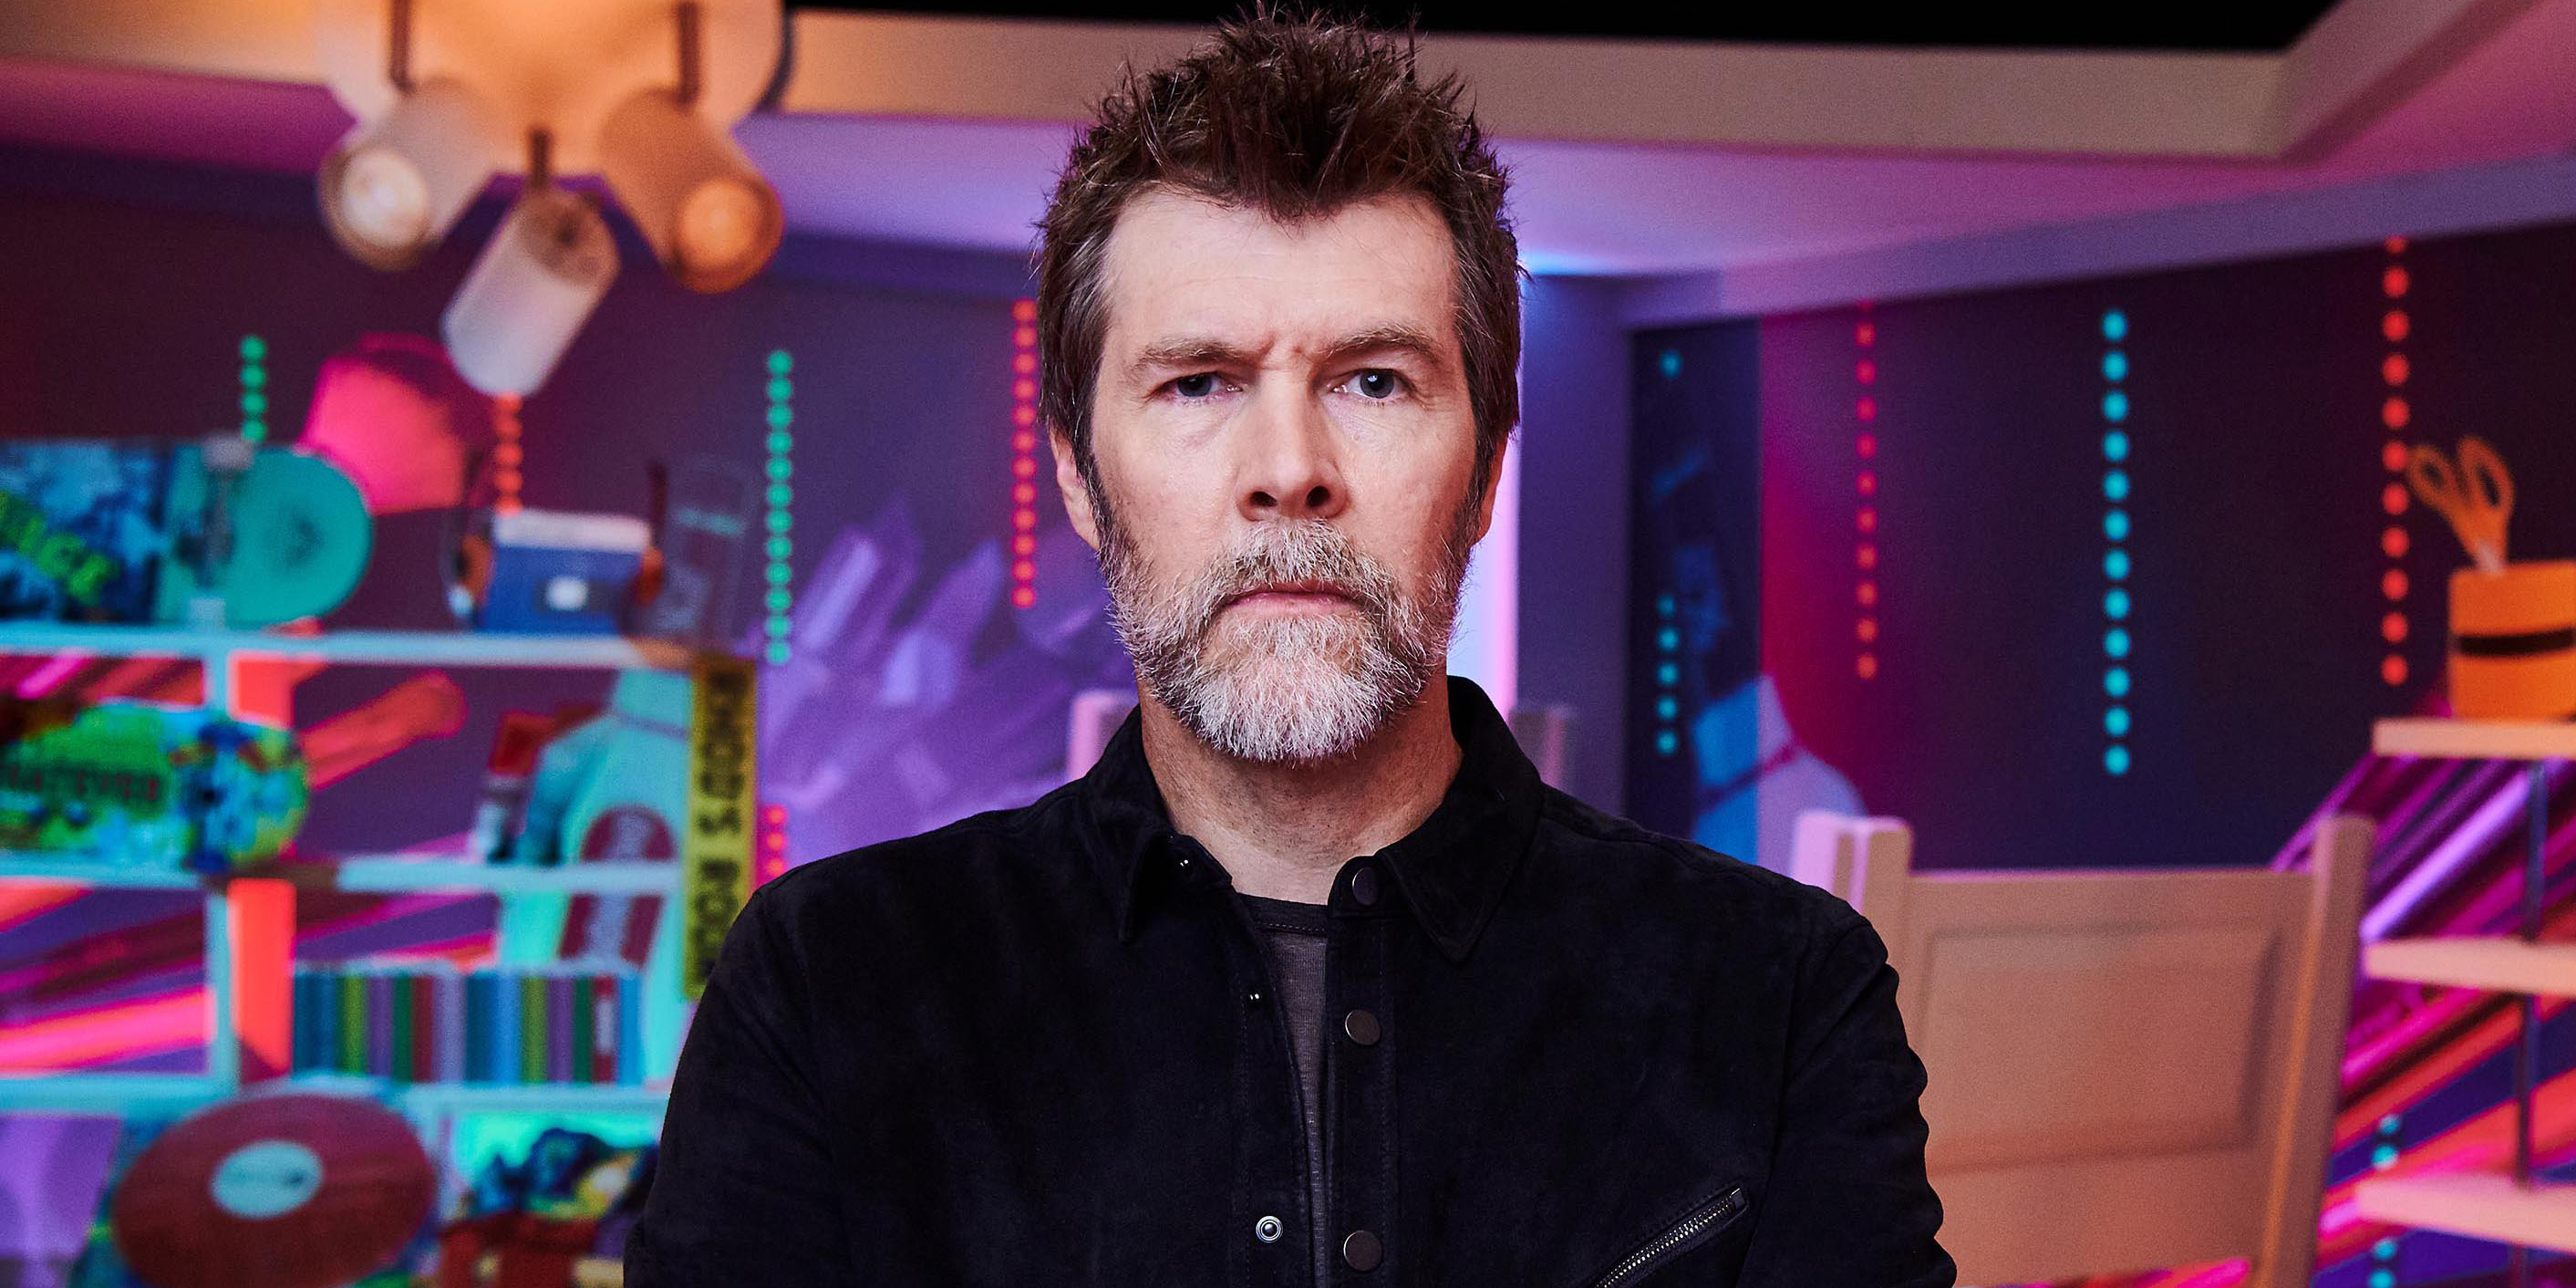 Rhod Gilbert Says He's Using 'Humour' In Cancer Treatment